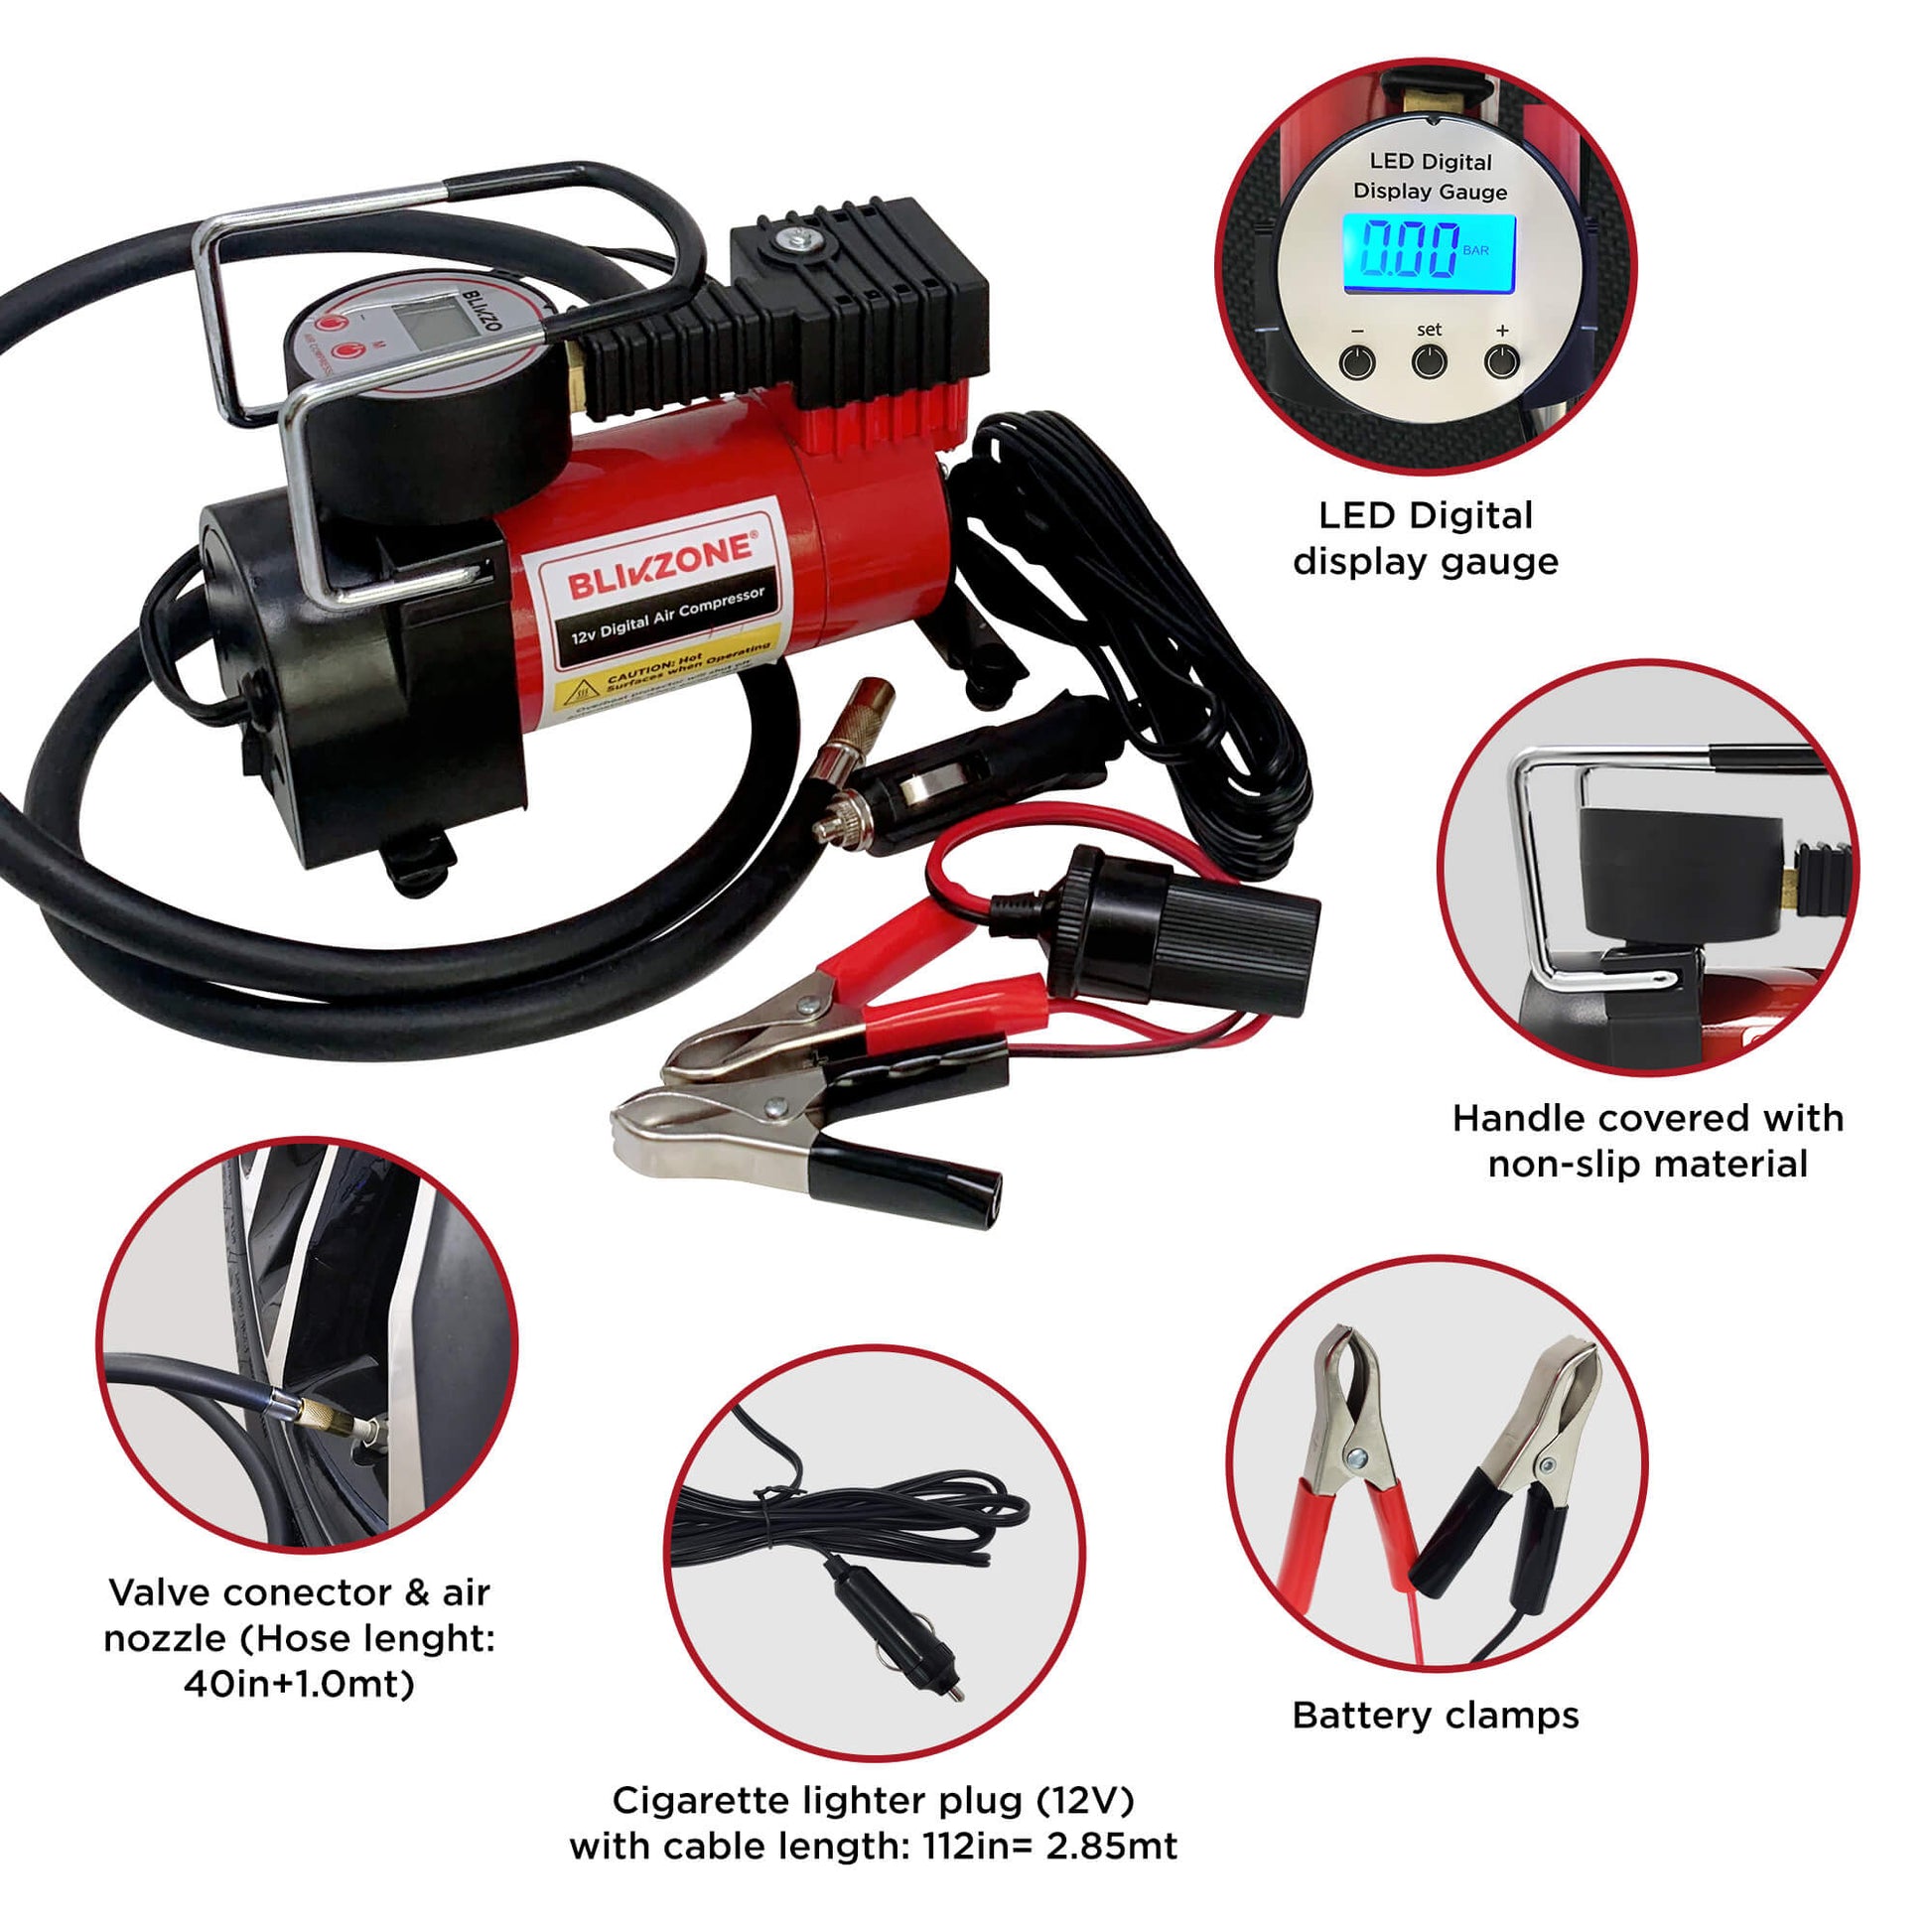 Blikzone Car Emergency Safety Kit Red- Digital Air Compressor for Car Featurespressor for Car Features